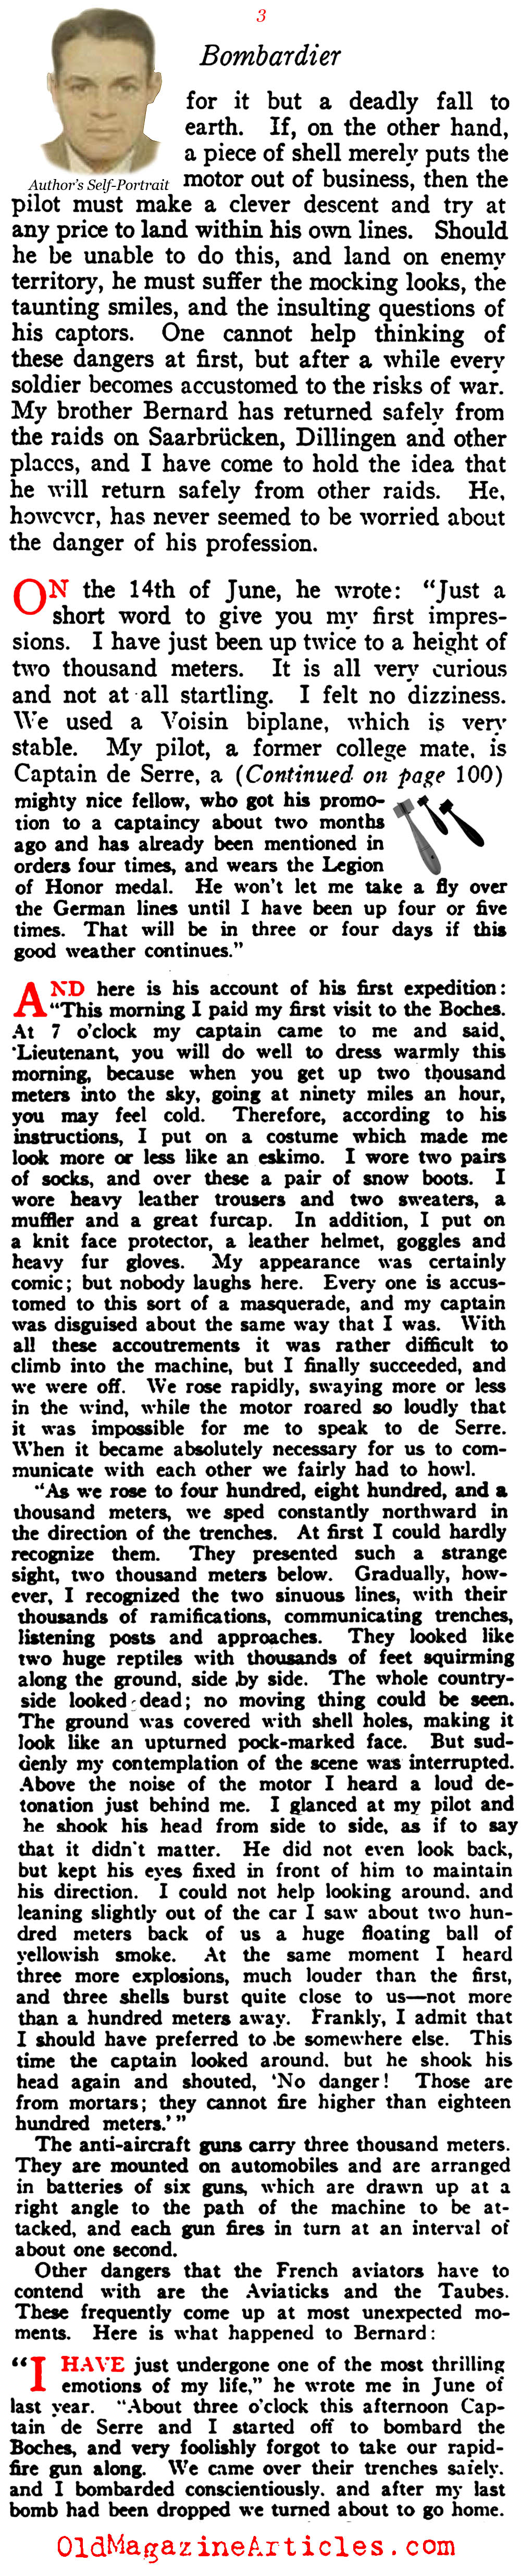 A Letter from a Bombardier in the French Air Corps   (Vanity Fair, 1916)